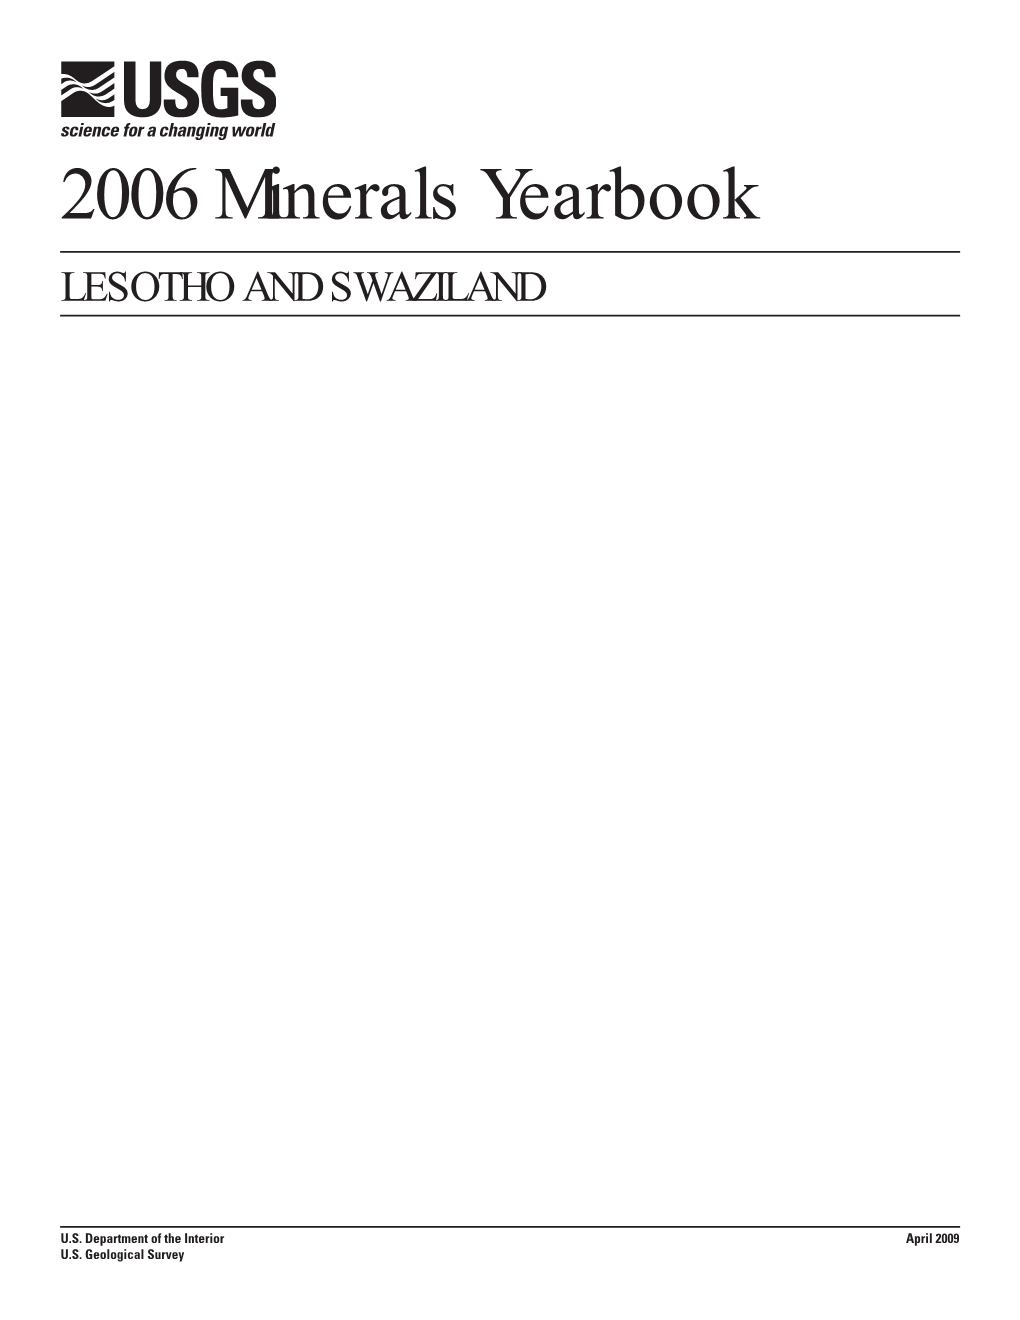 The Mineral Industries of Lesotho and Swaziland in 2006